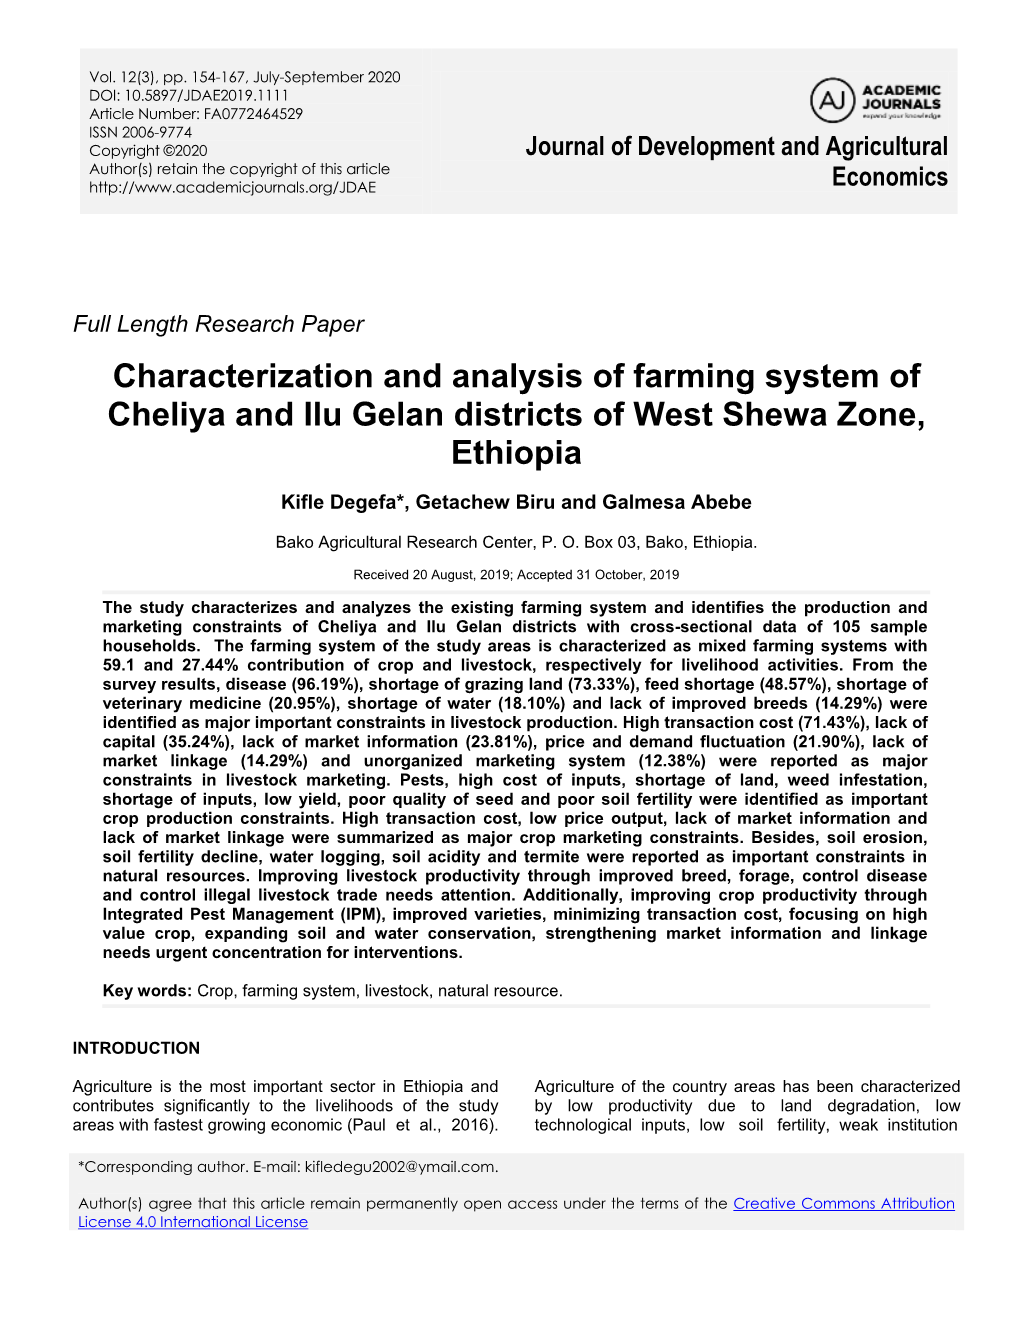 Characterization and Analysis of Farming System of Cheliya and Ilu Gelan Districts of West Shewa Zone, Ethiopia